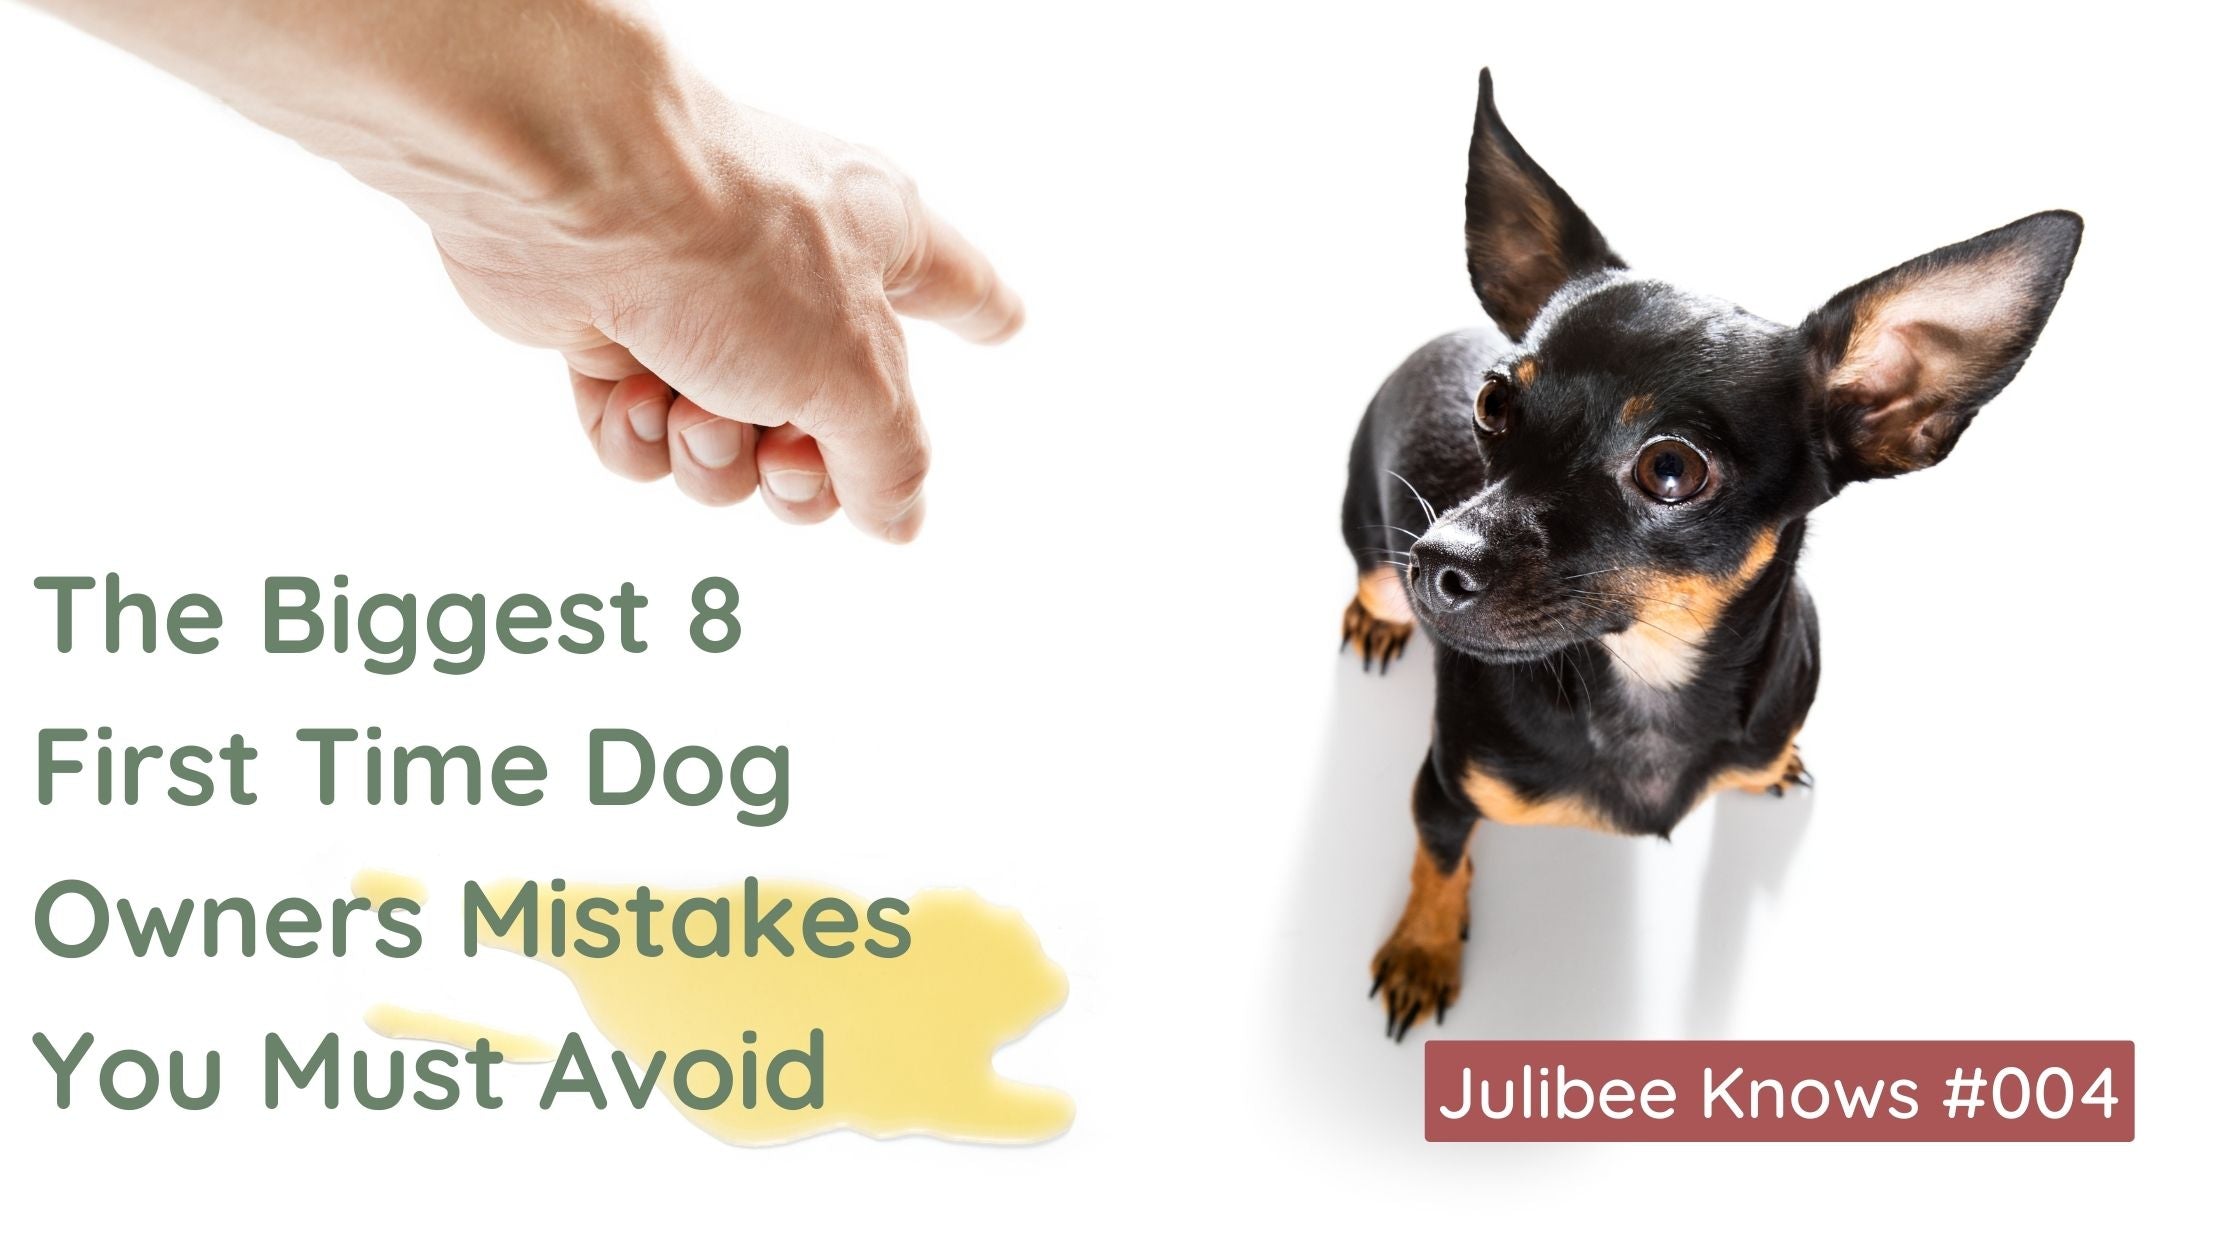 The Biggest 8 First Time Dog Owners Mistakes You Must Avoid